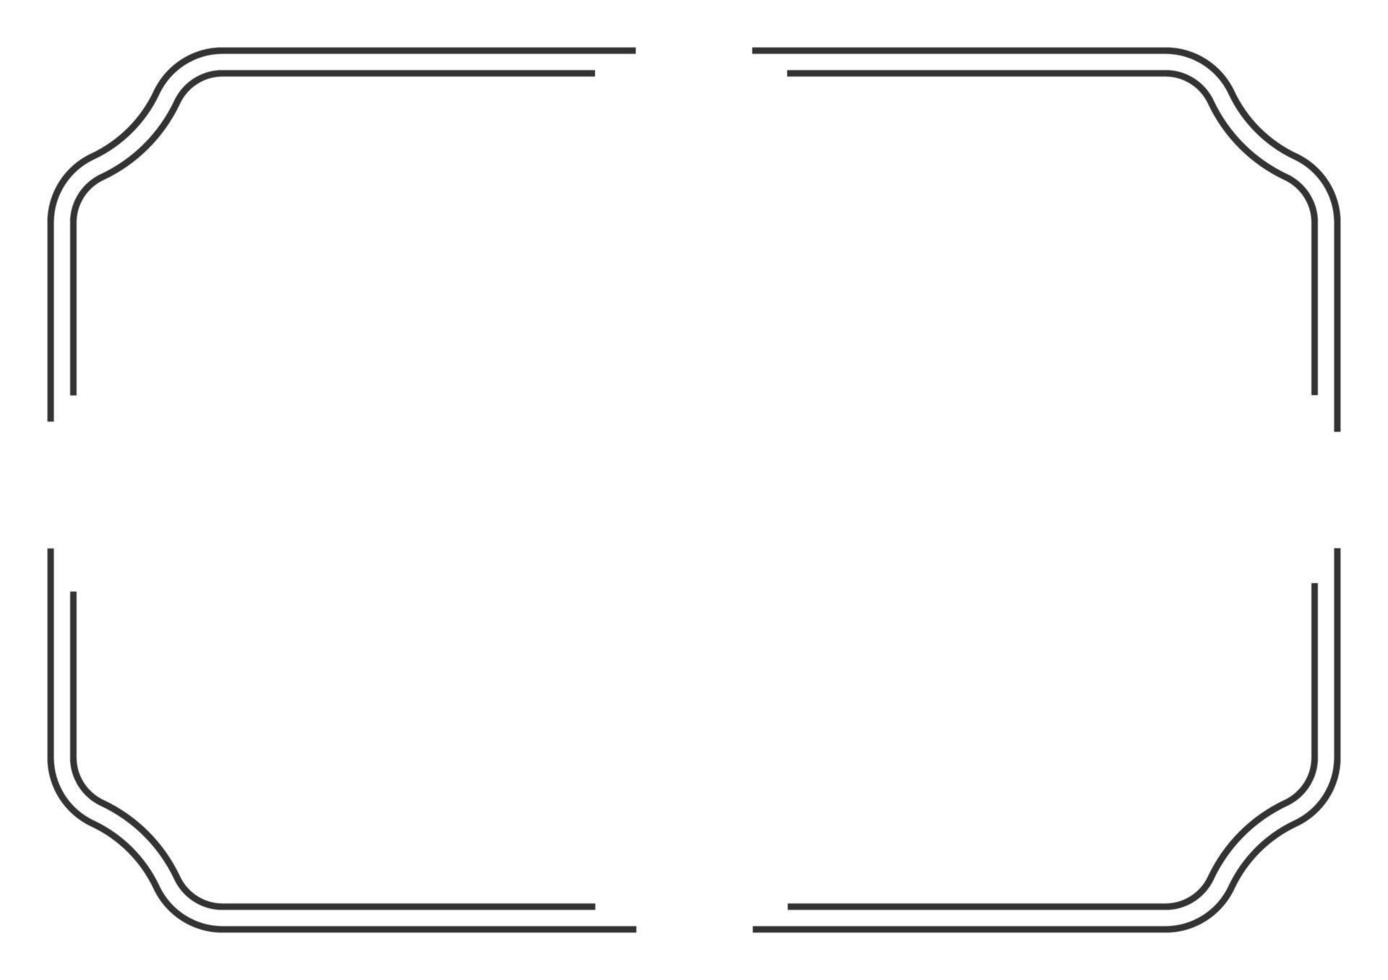 Frame and border isolated vector. Black outline on white bakcground template. vector